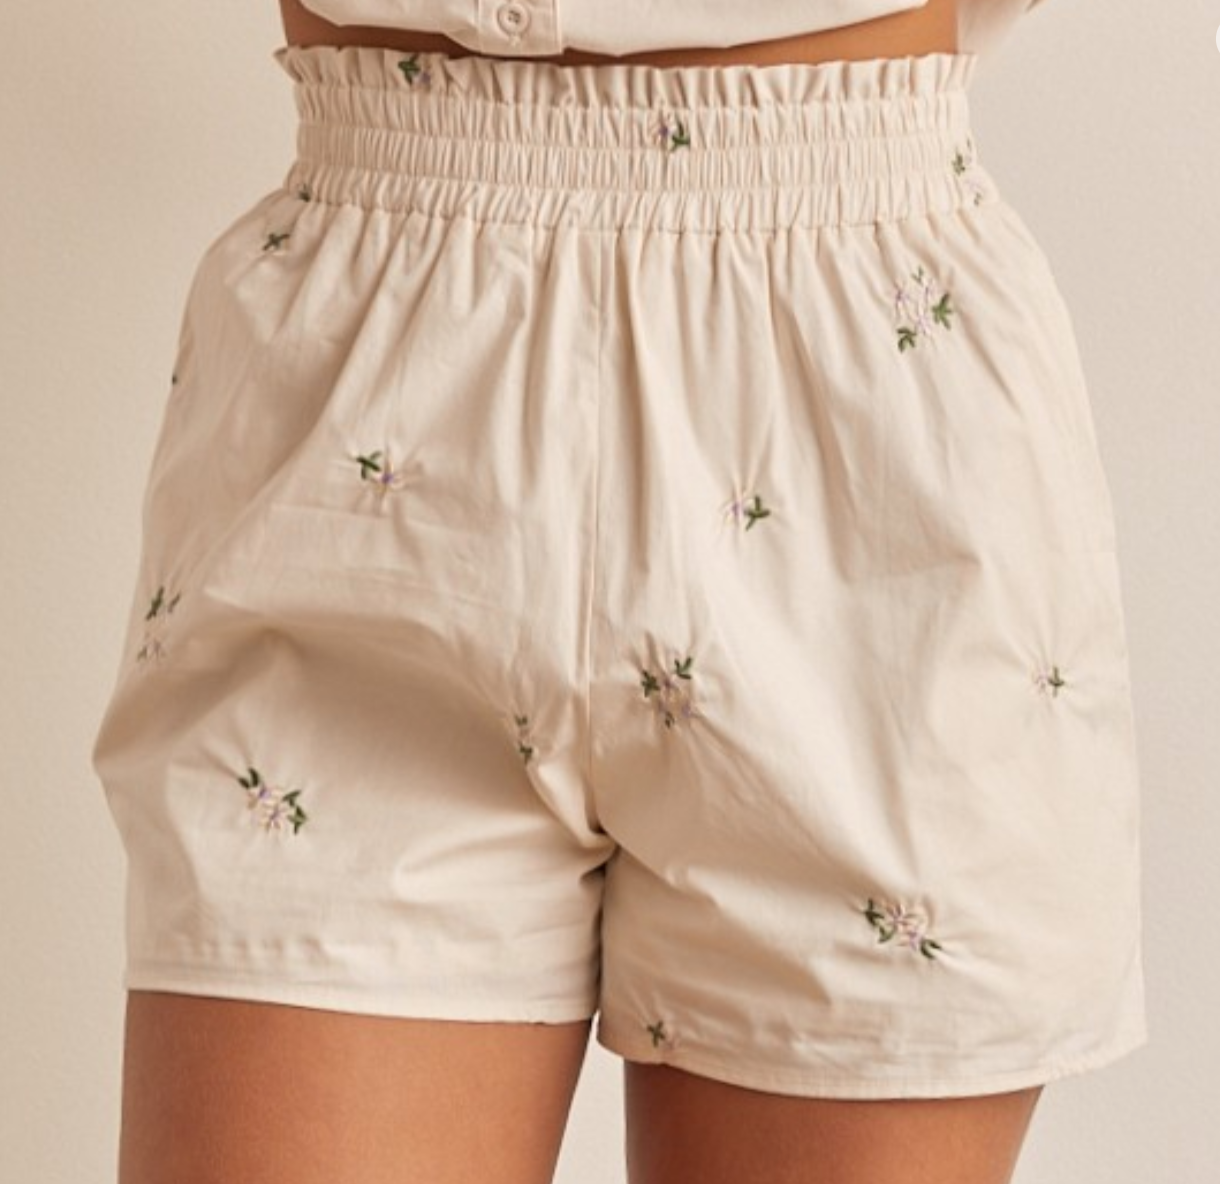 Butter Cup Shorts